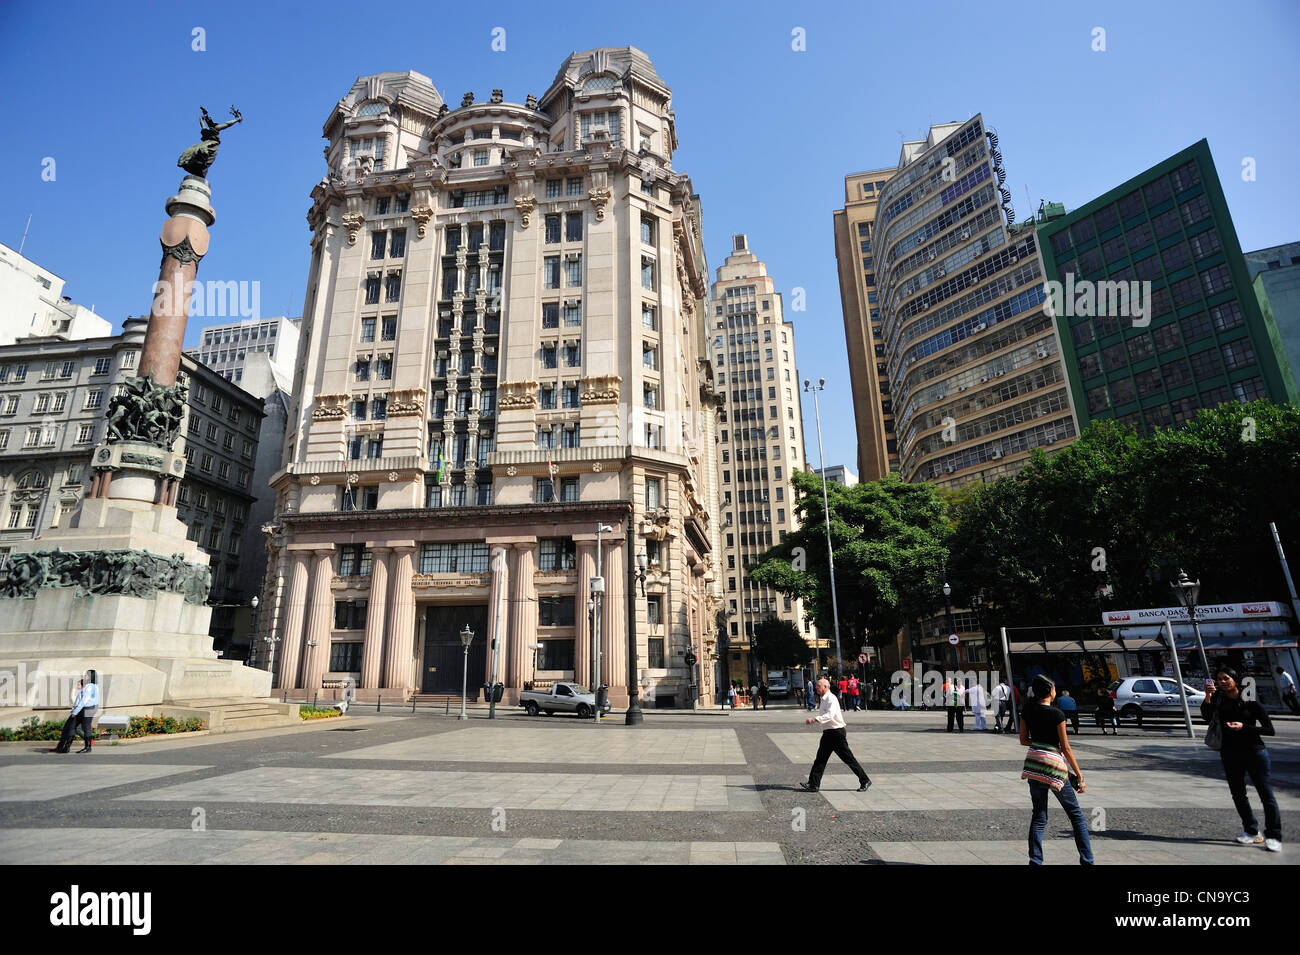 Brazil, Sao Paulo, Patio do Colégio, place where the city was founded in 1554 Stock Photo